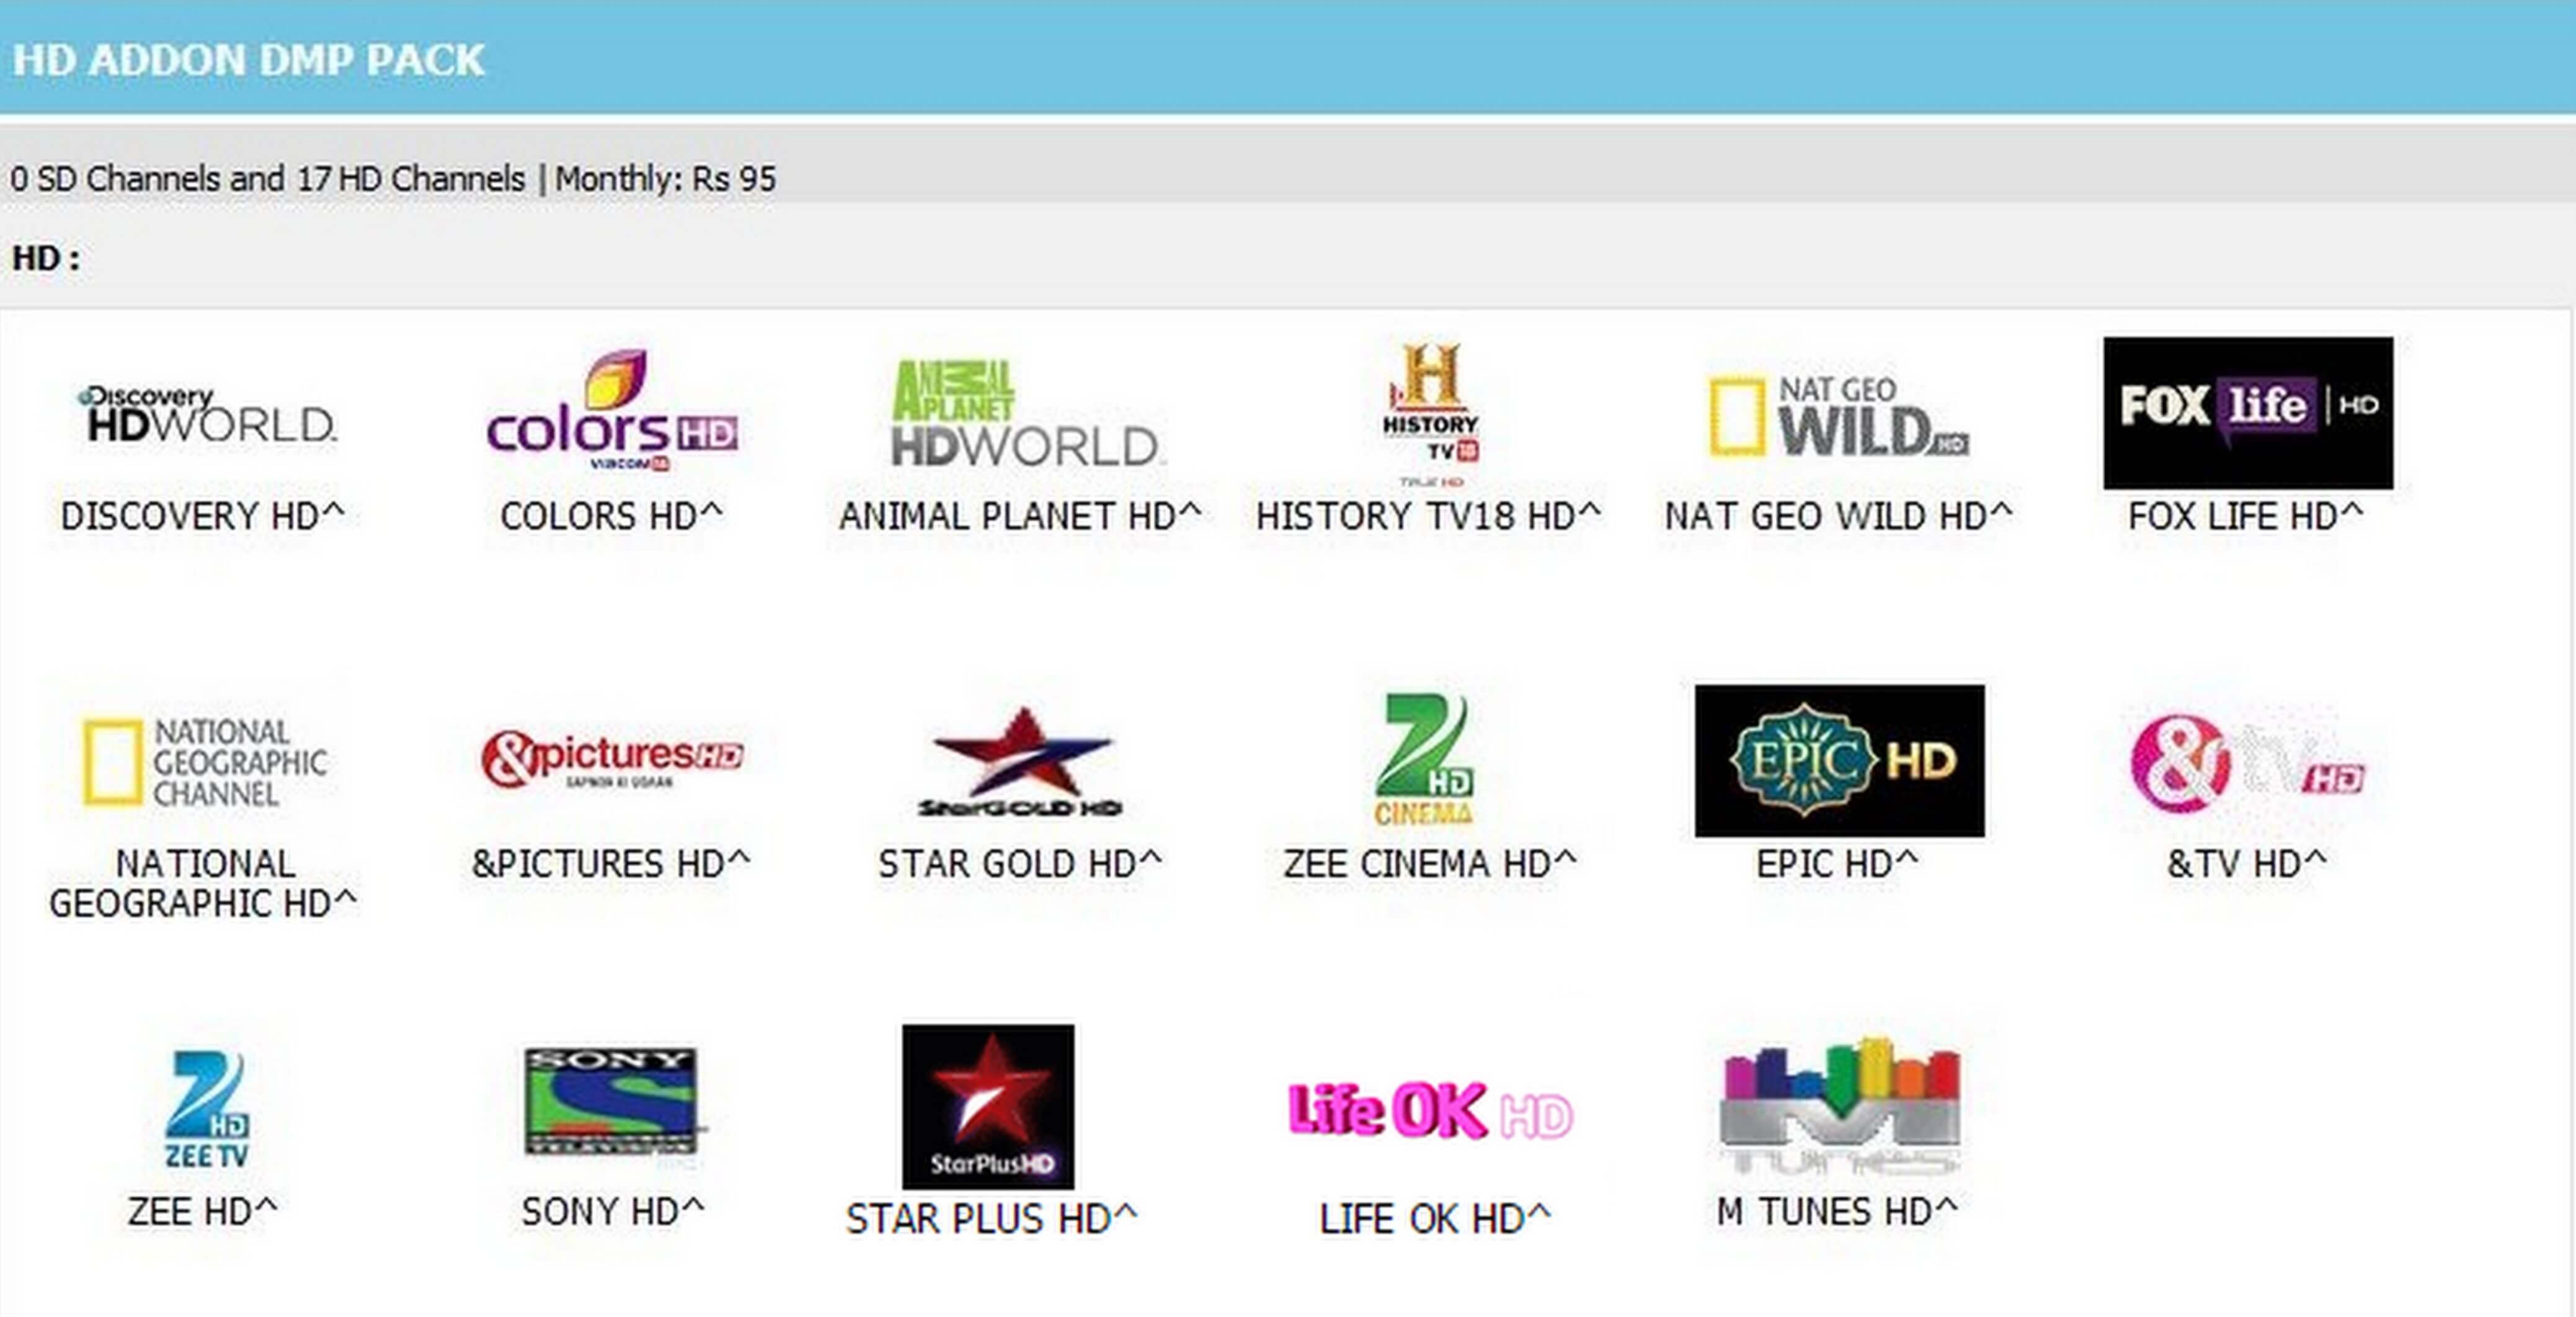 TataSky launches HD addon pack with 17 HD channels for Rs. 95 | TelecomTalk